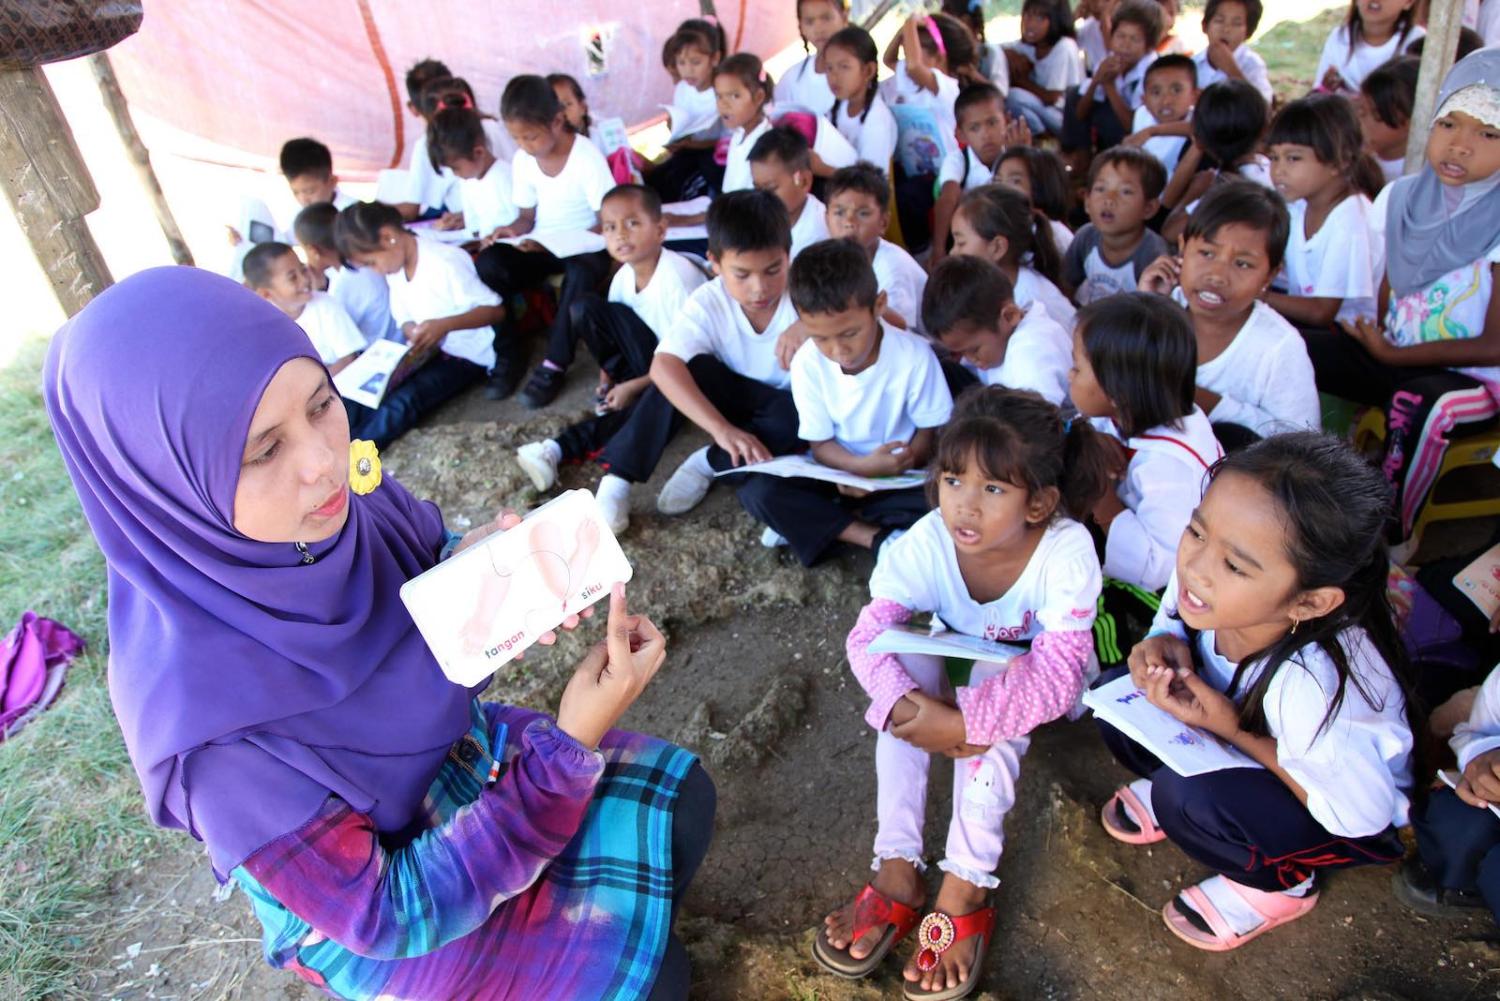 Without documents, children of the Bajau Laut community in Sabah, East Malaysia, cannot attend school (Photo: PKPKM Lahad Datu and Semporna/Flickr)